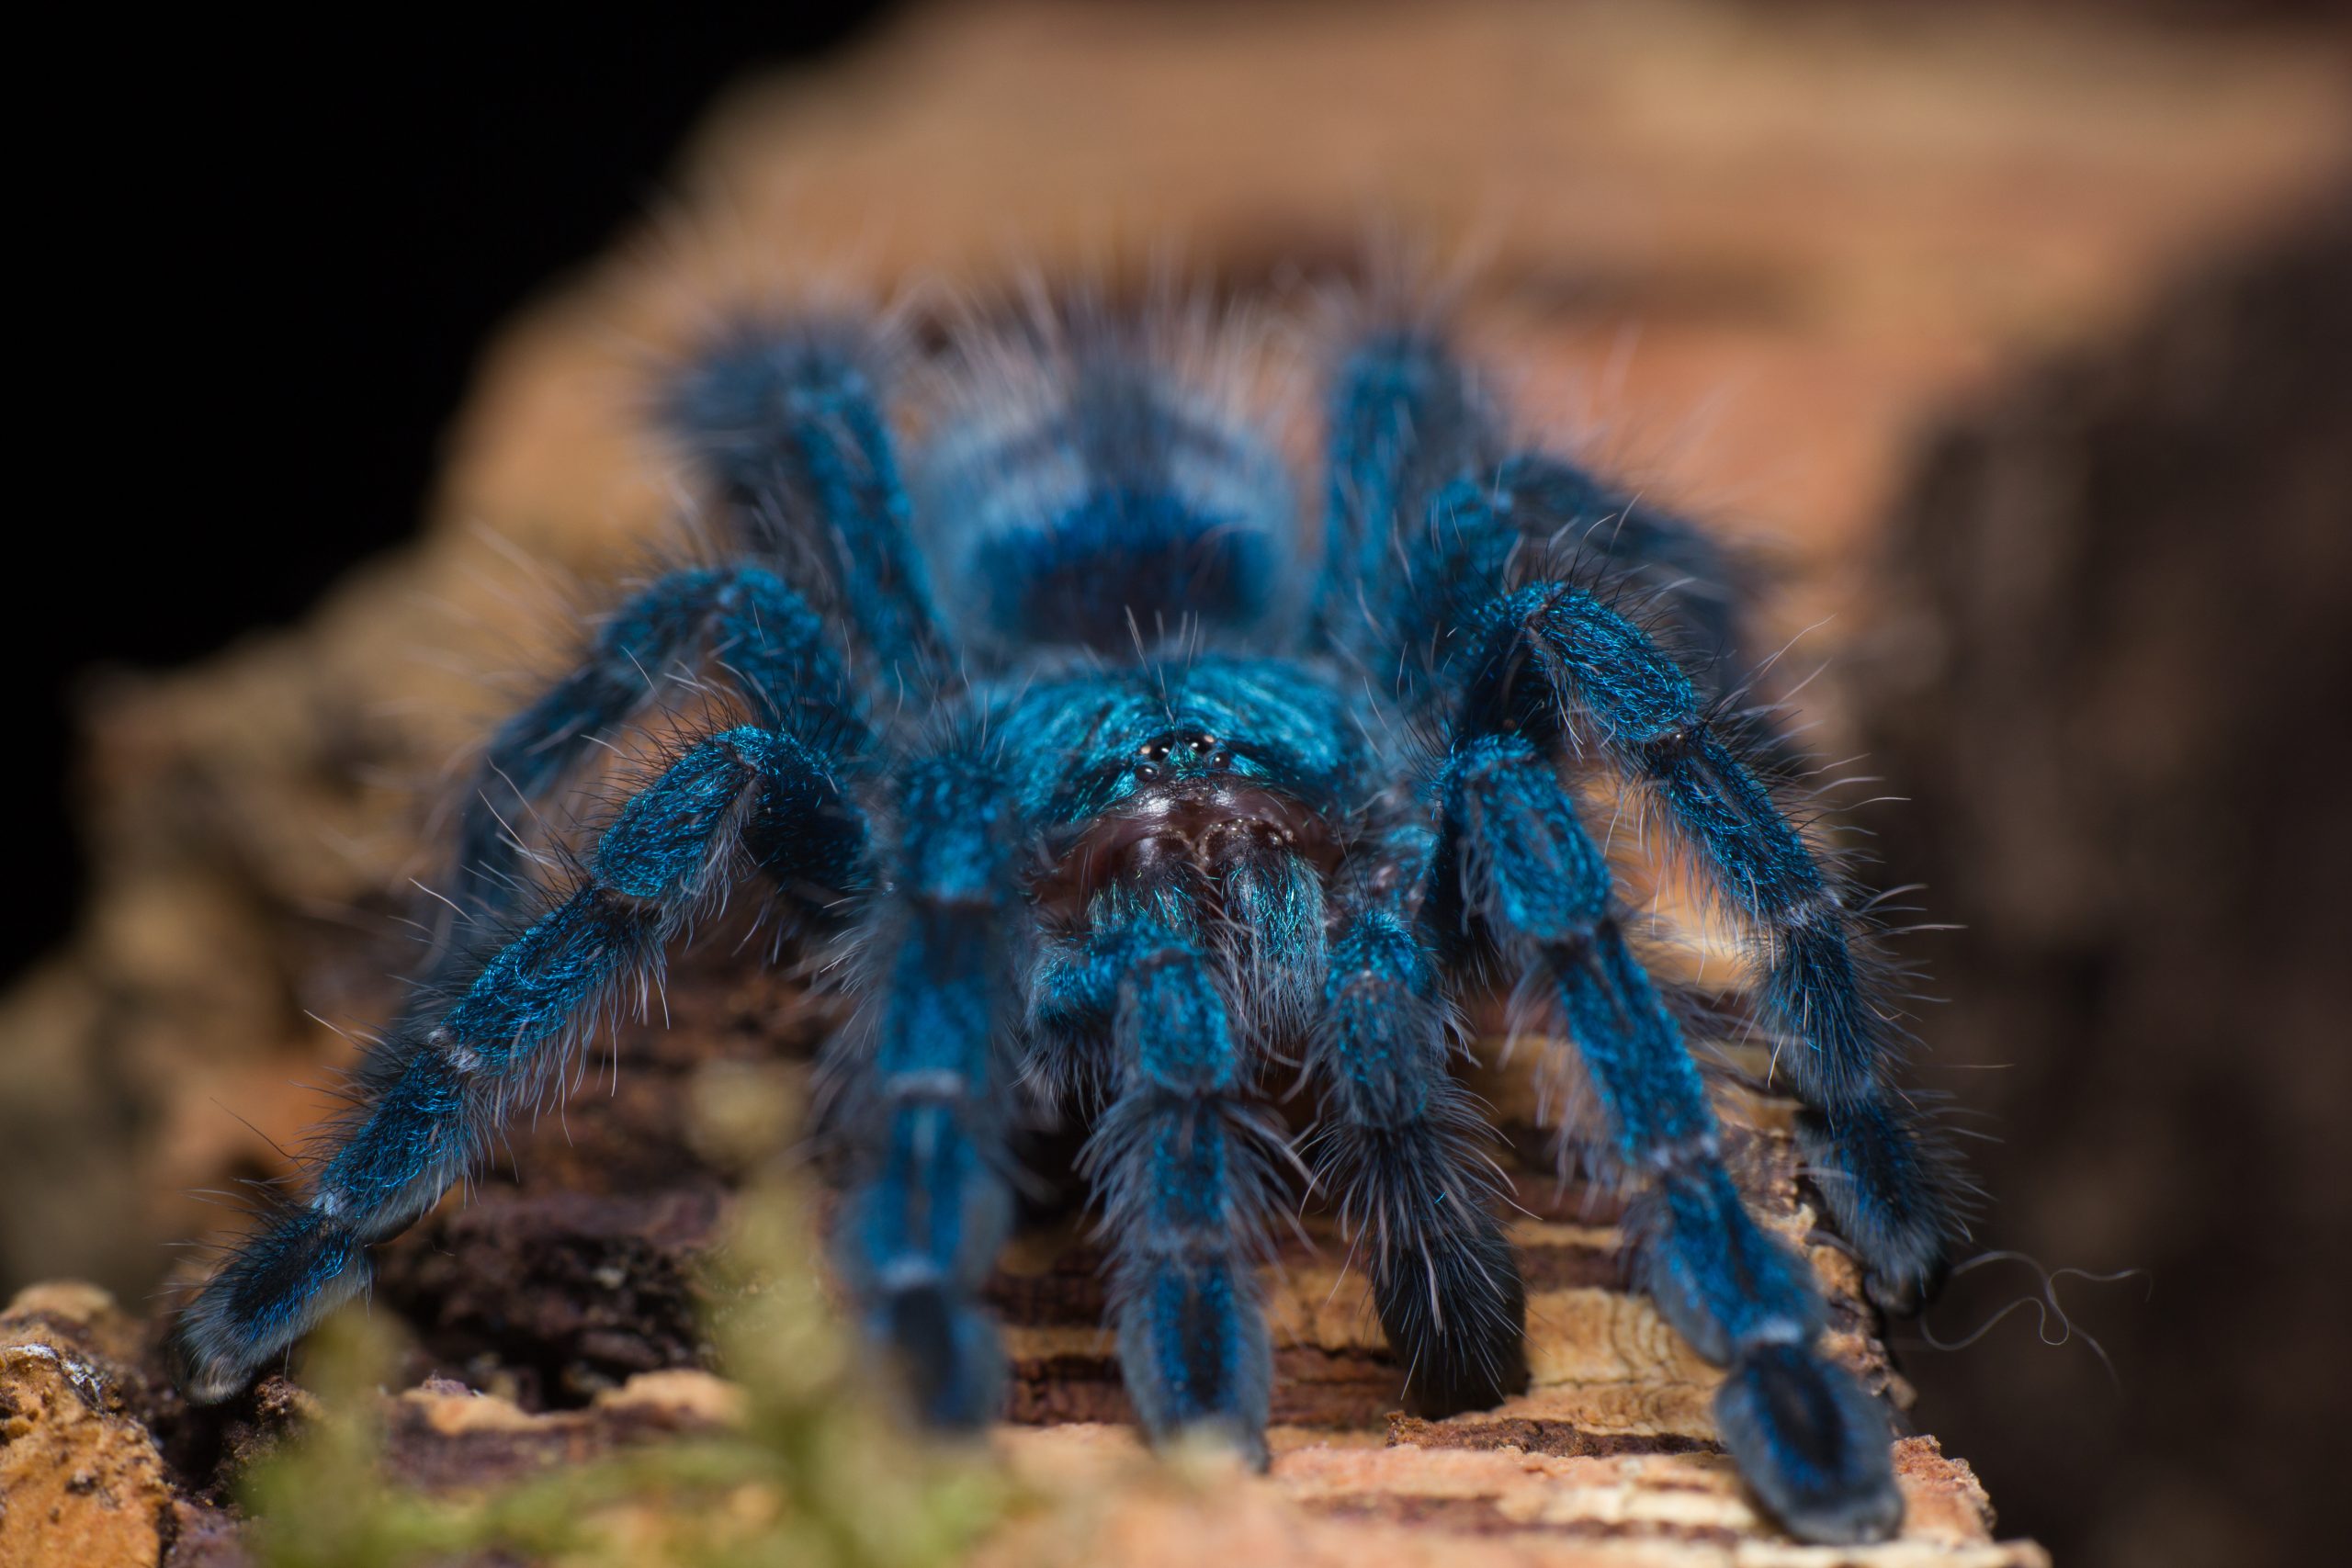 Dr Vinod Kumar and Dr Saoirse Foley discover why tarantulas come in vivid blues and greens